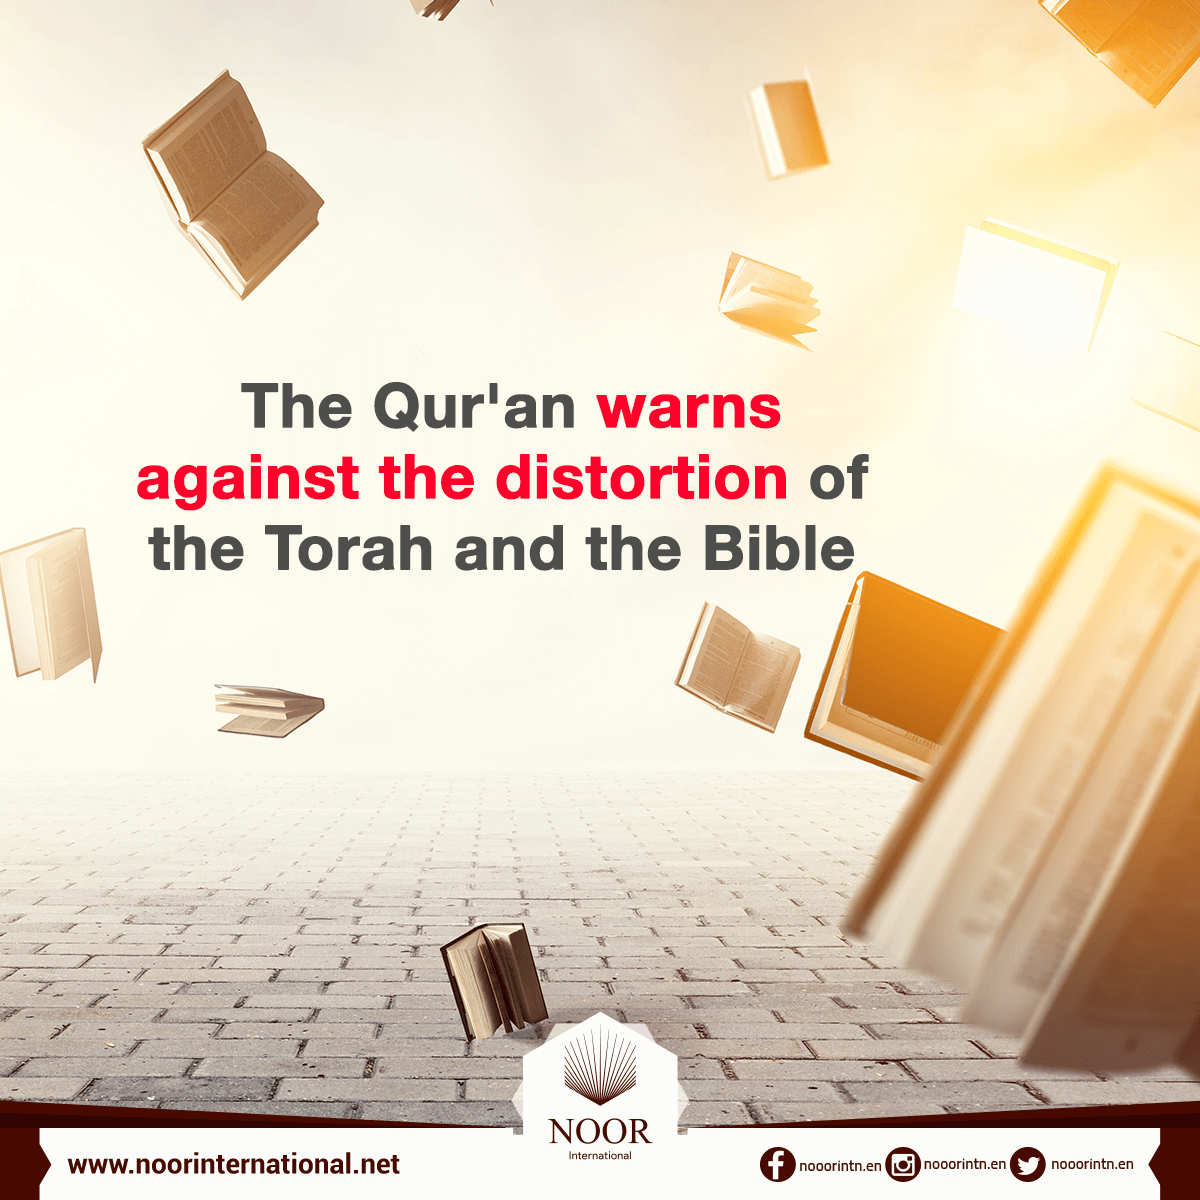 The Qur'an warns against the distortion of the Torah and the Bible